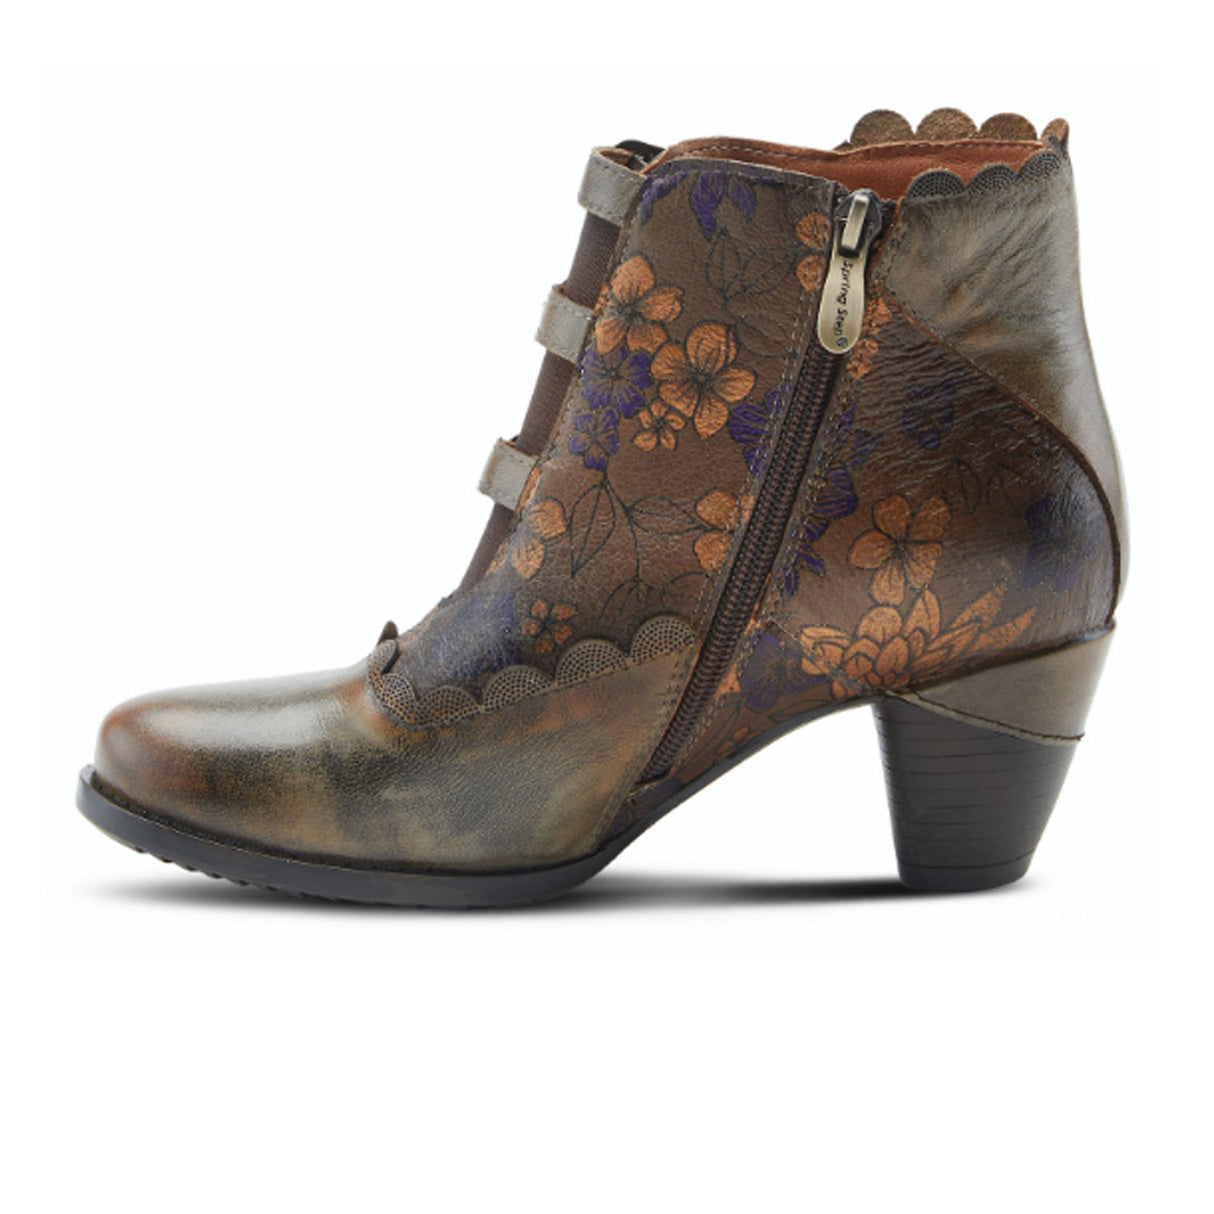 L'Artiste IWantIt Ankle Boot (Women) - Brown Multi Boots - Fashion - Ankle Boot - The Heel Shoe Fitters